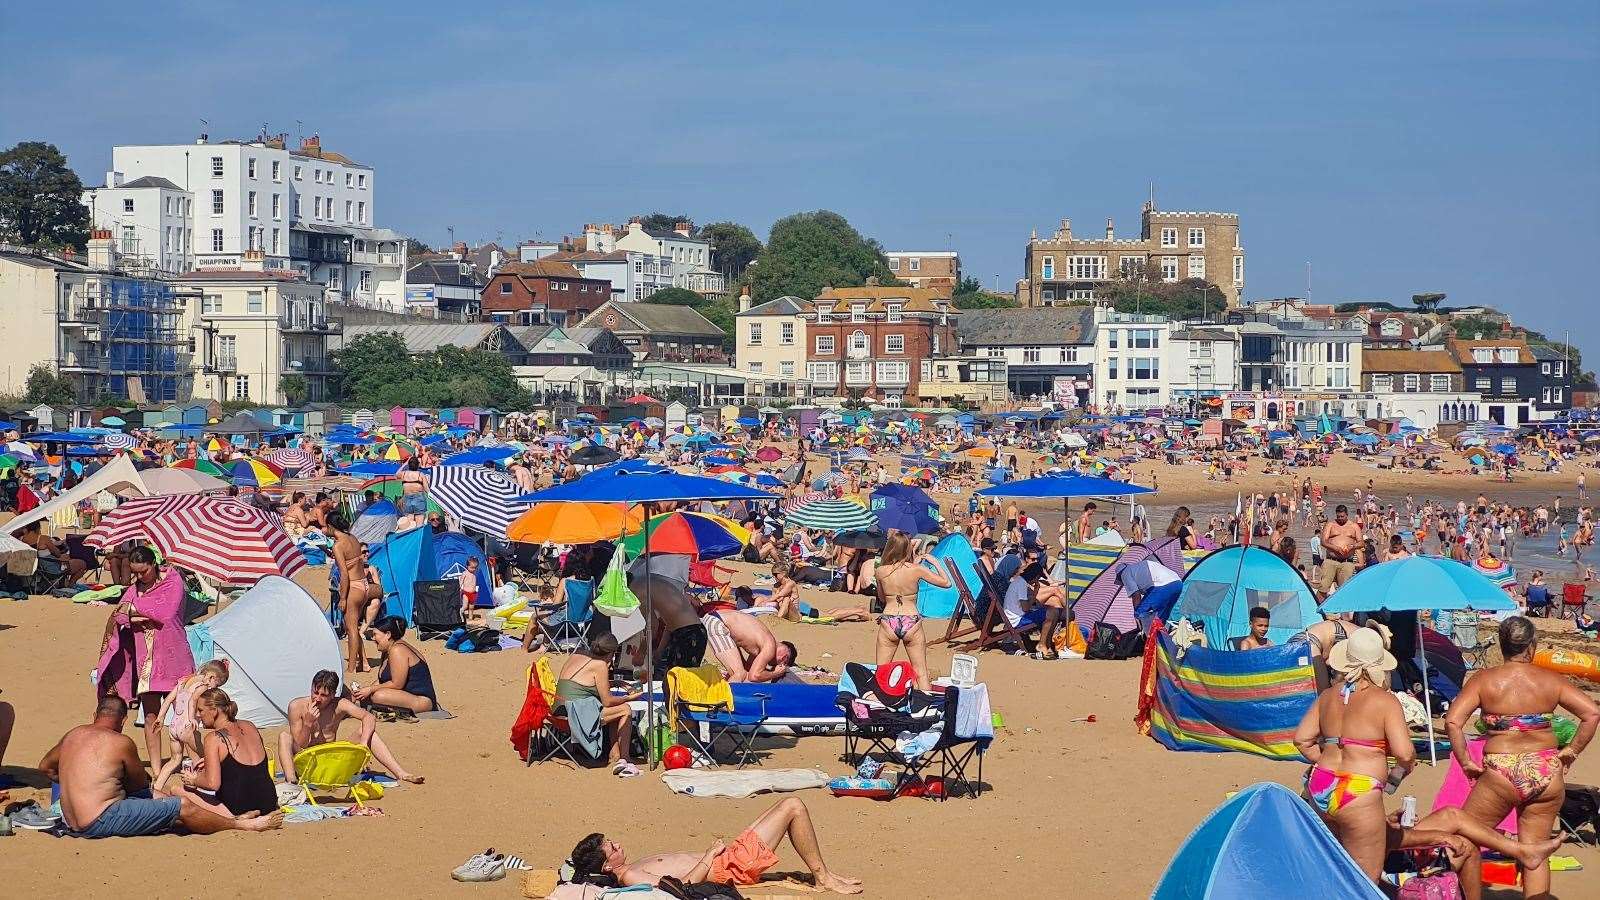 Busy Broadstairs beach this afternoon as temperatures hit 30 degrees